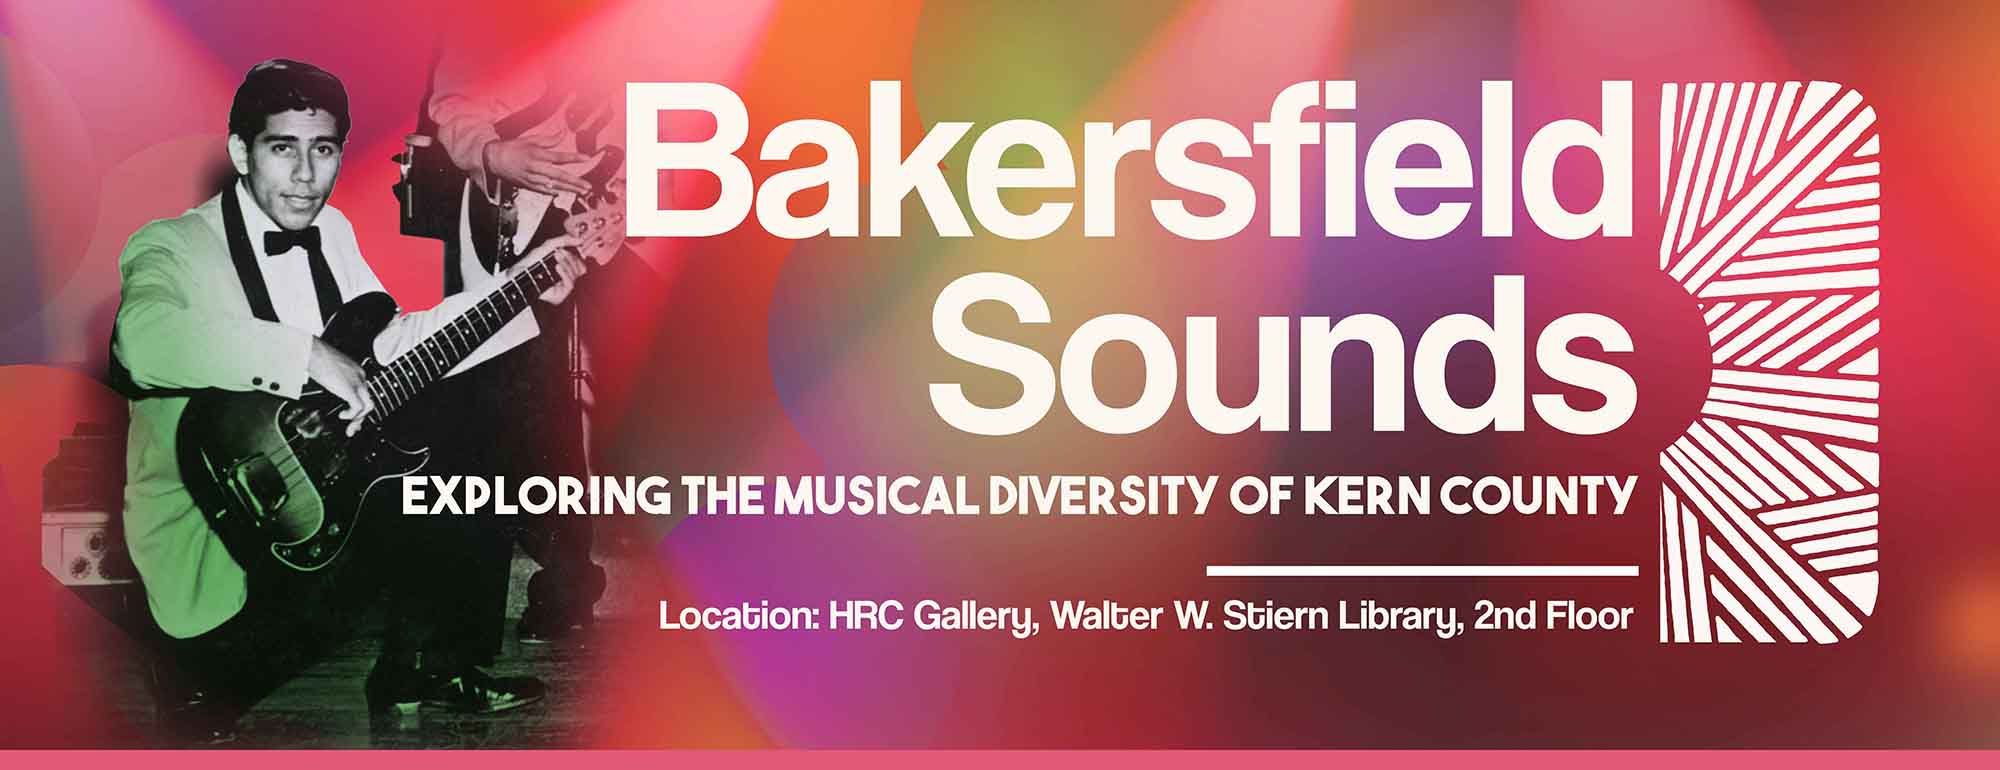 Sounds of Bakersfield